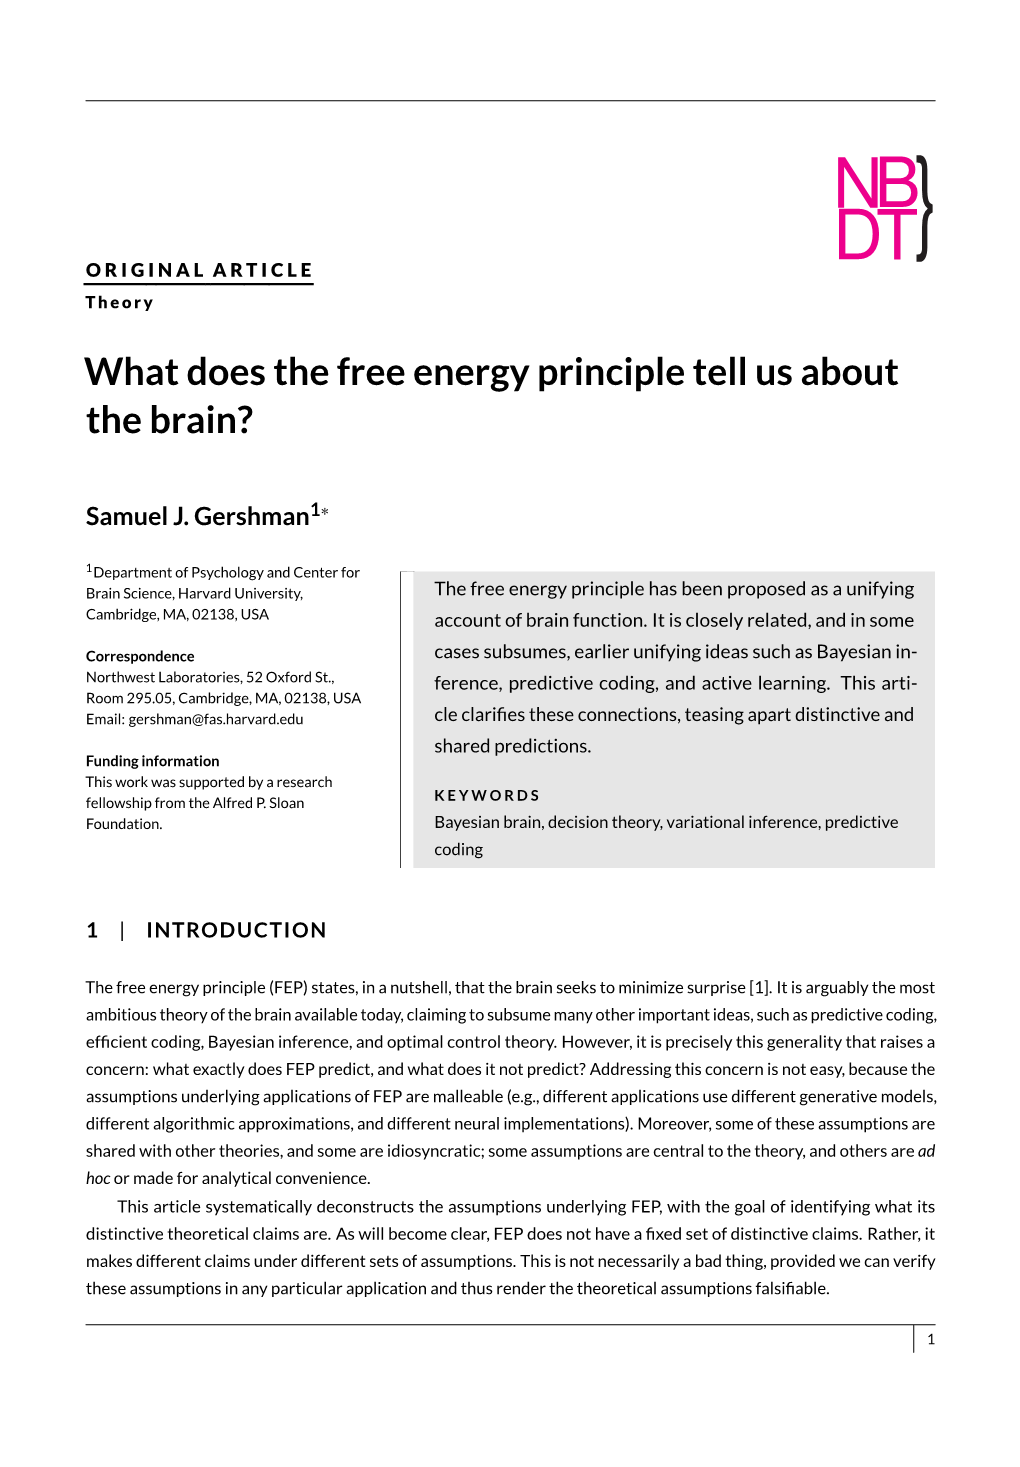 What Does the Free Energy Principle Tell Us About the Brain?